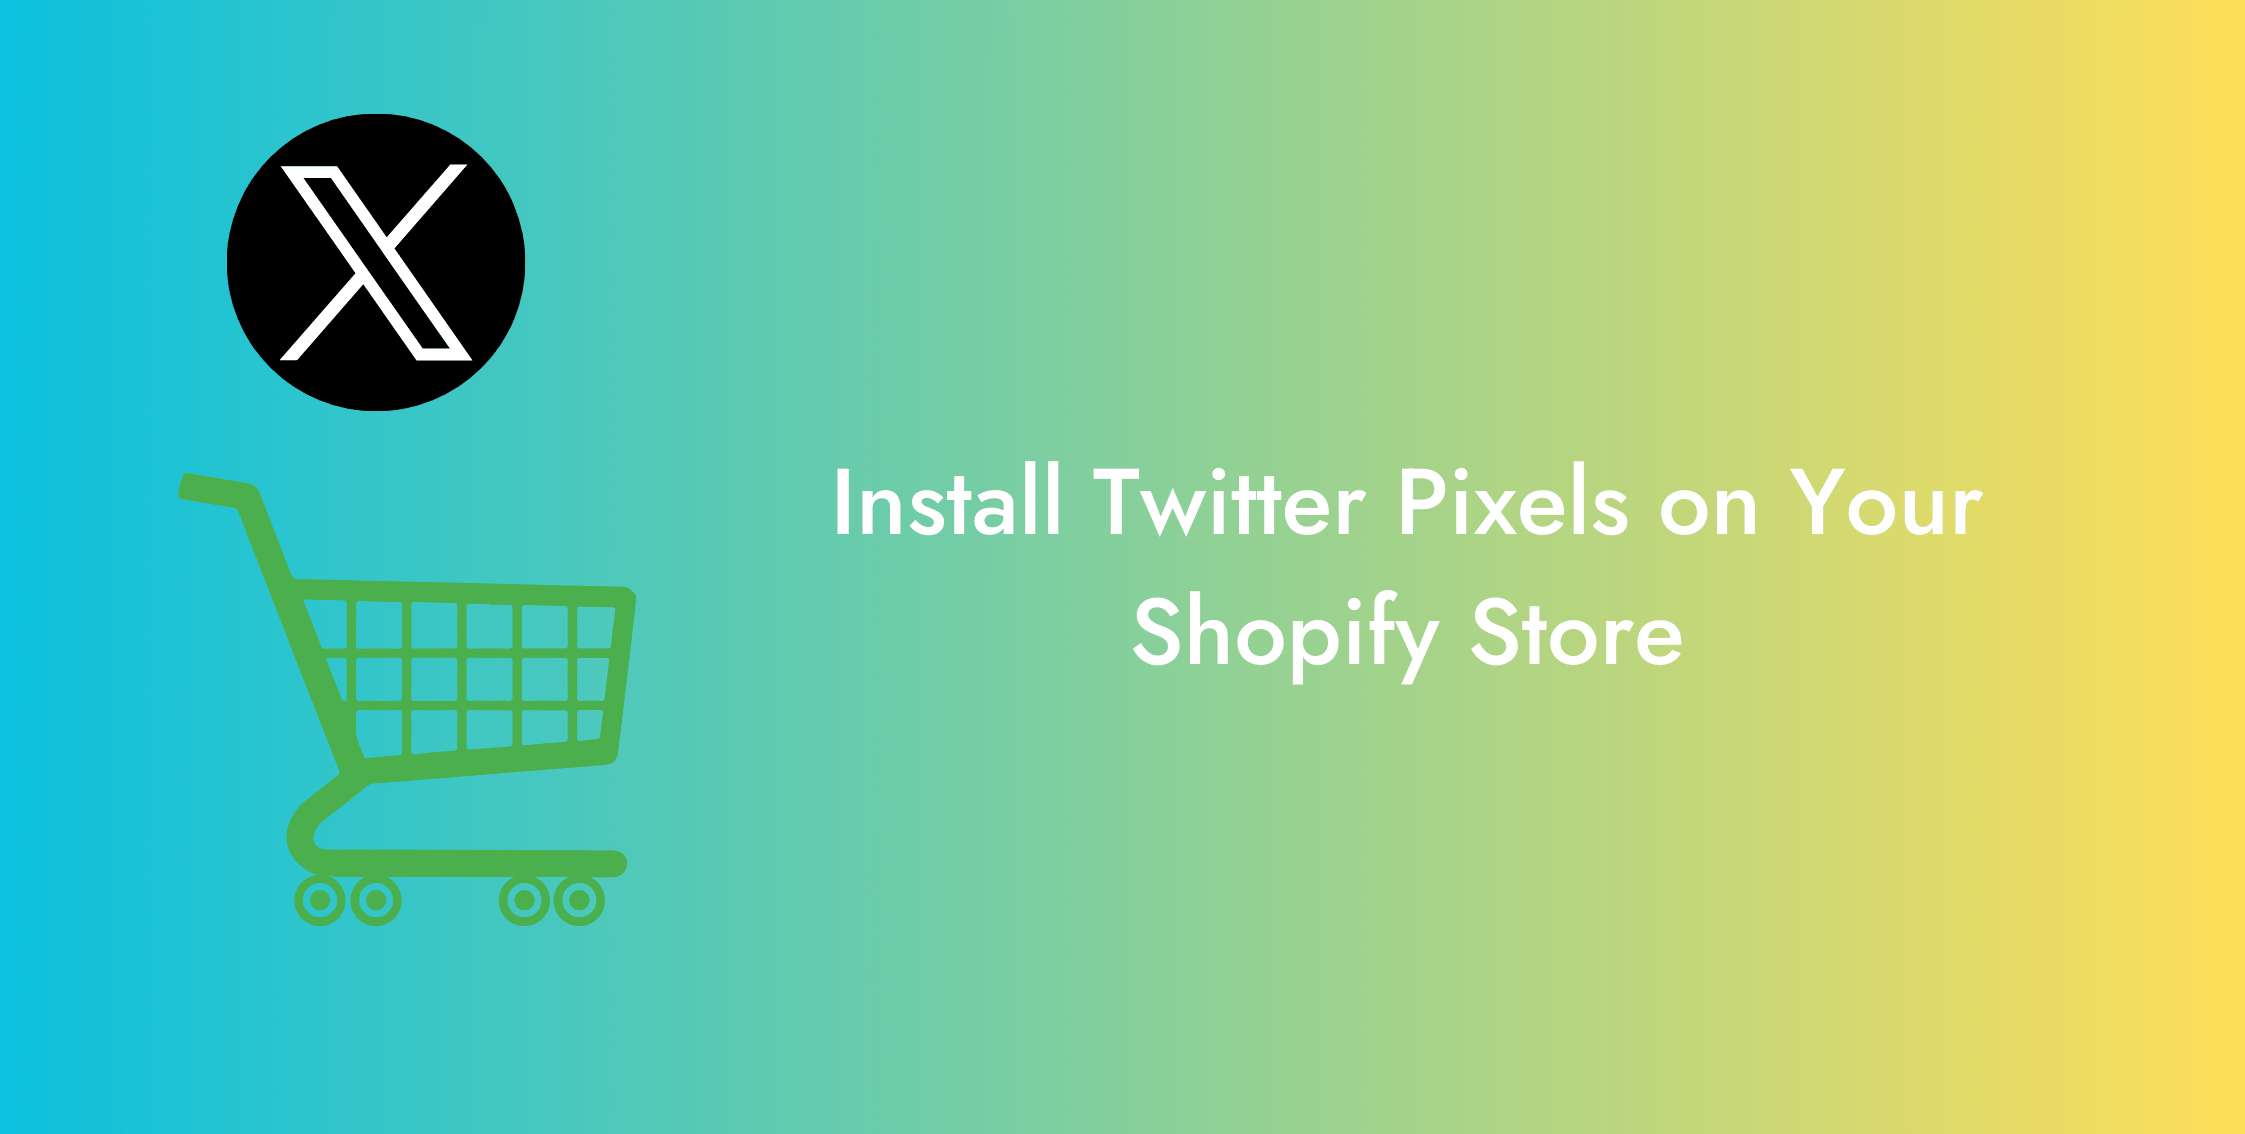 How To Setup Twitter Pixel On Your Shopify Store?